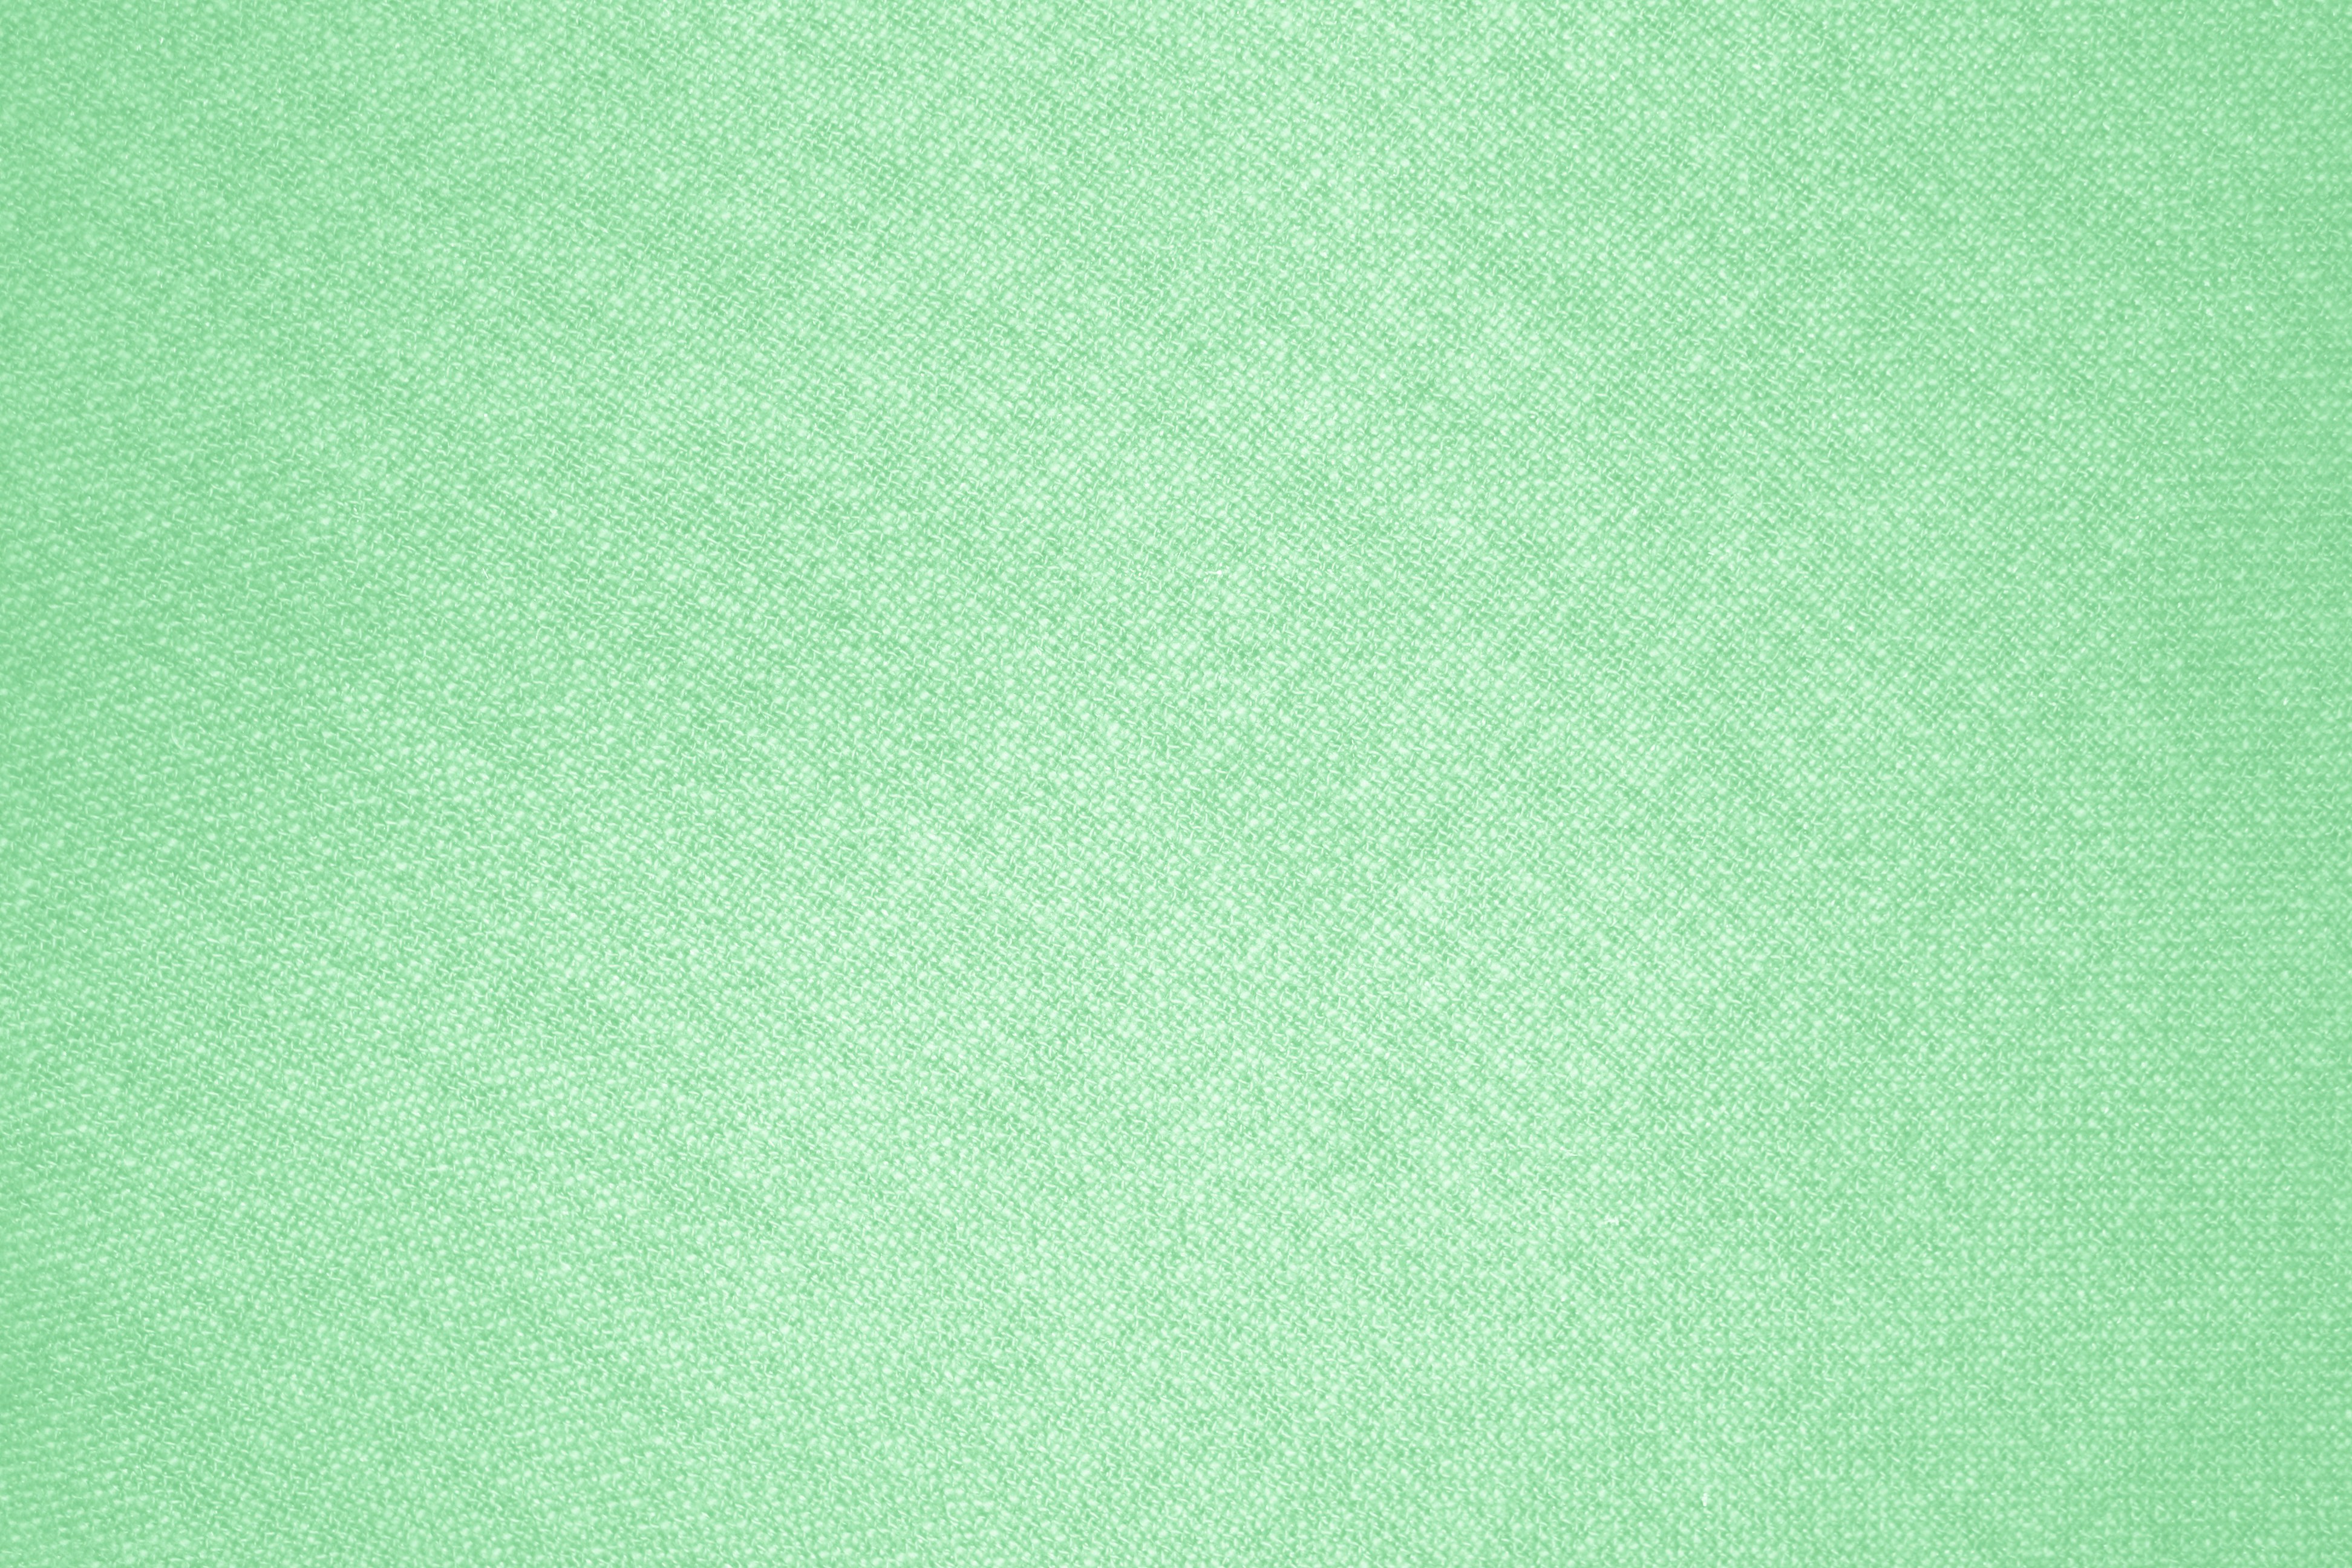 Light Green Fabric Texture Picture Free Photograph Photos Public